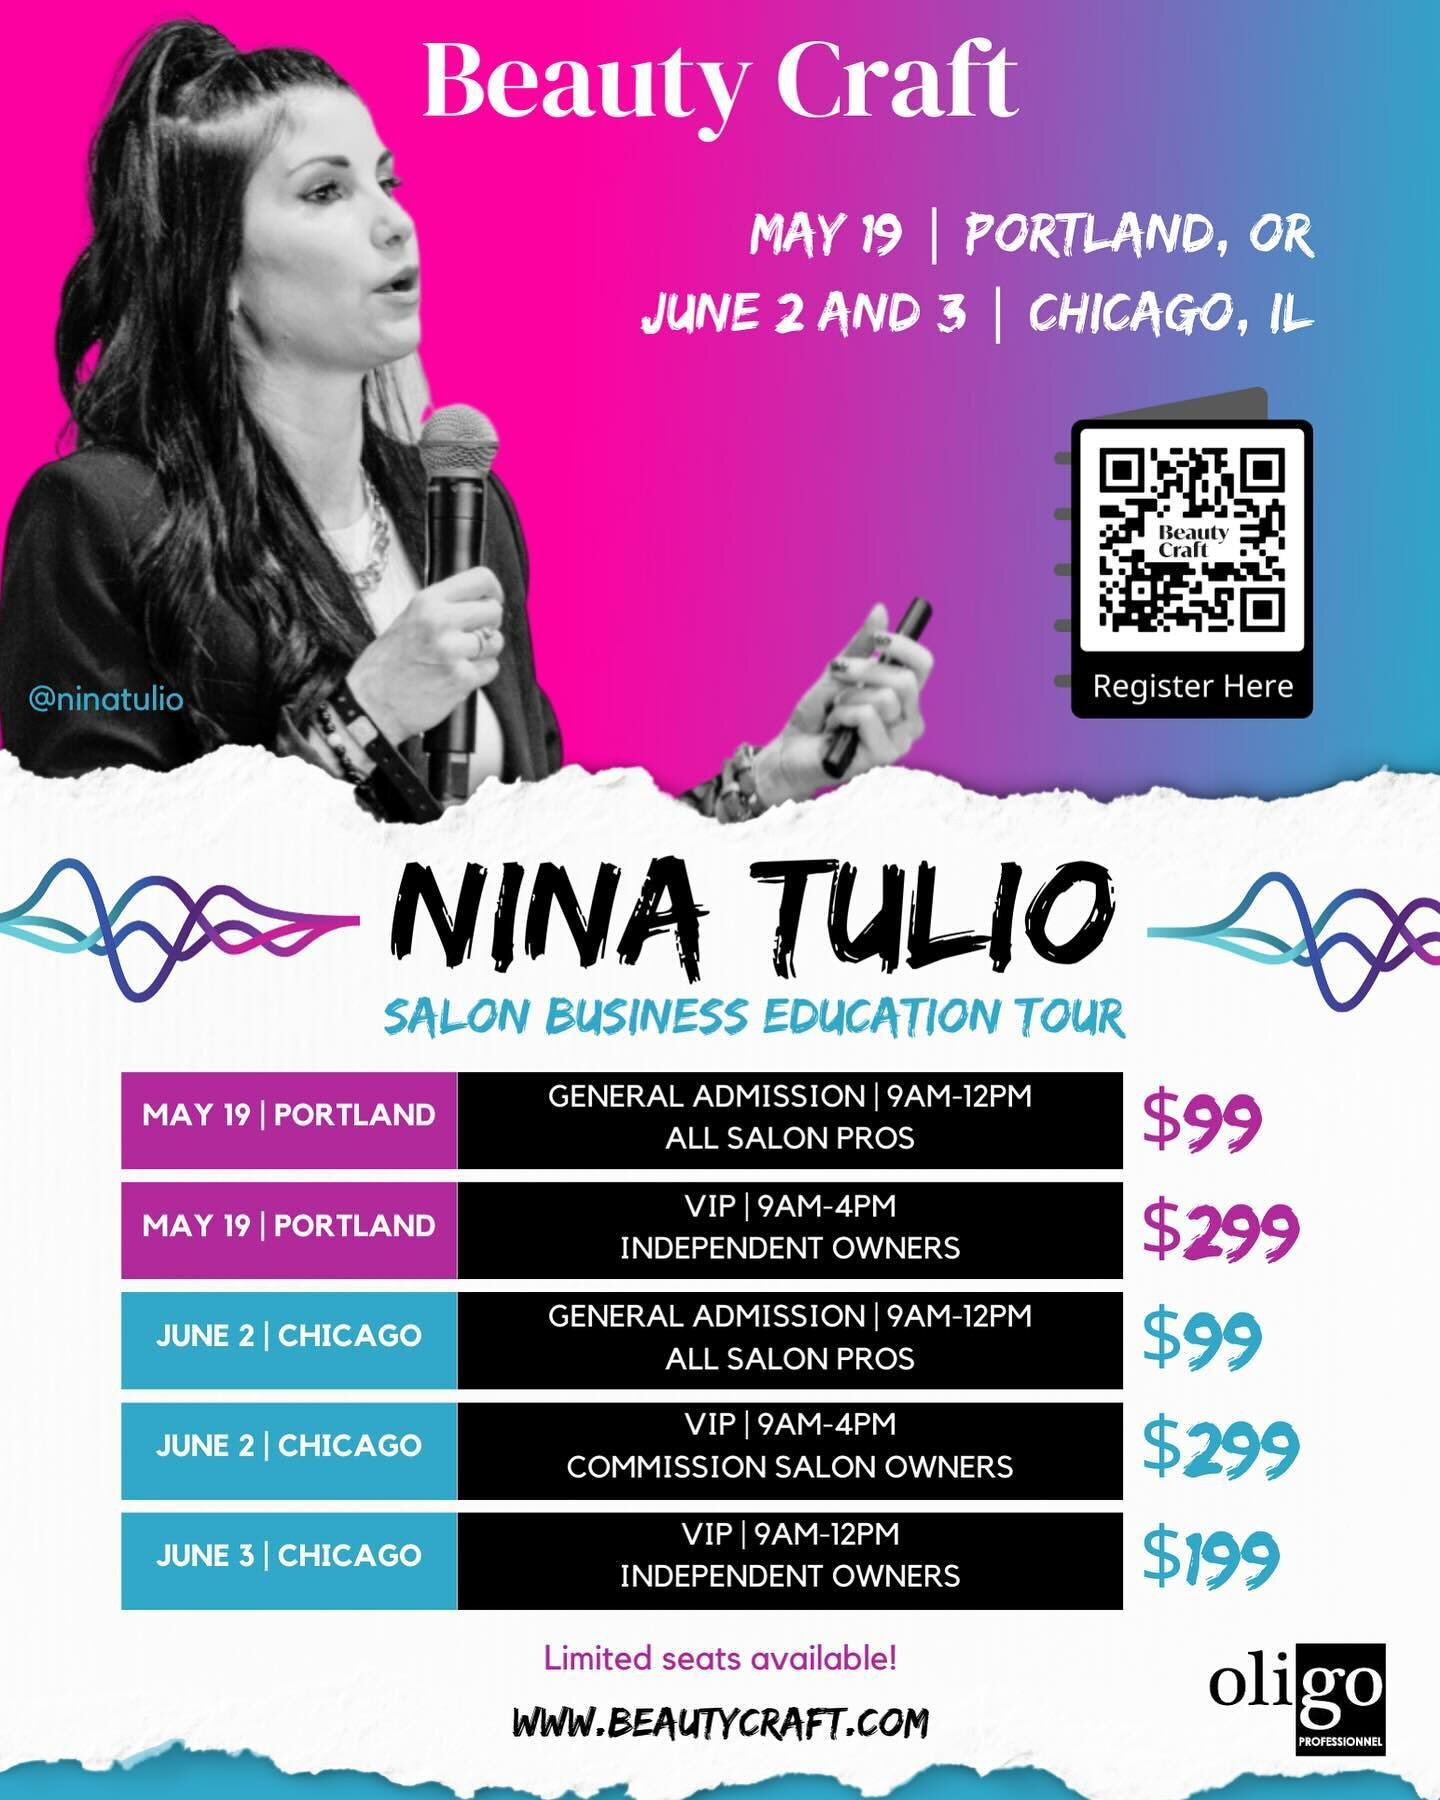 Salon business education tour 🤩 with @ninatulio 💖 

Nina x Beauty Craft x @oligopro bring you an unforgettable educational experience with Nina and all things salon business, profit, impact BTC and so much more!! 

‼️ Seats are limited! ‼️ 

Connec